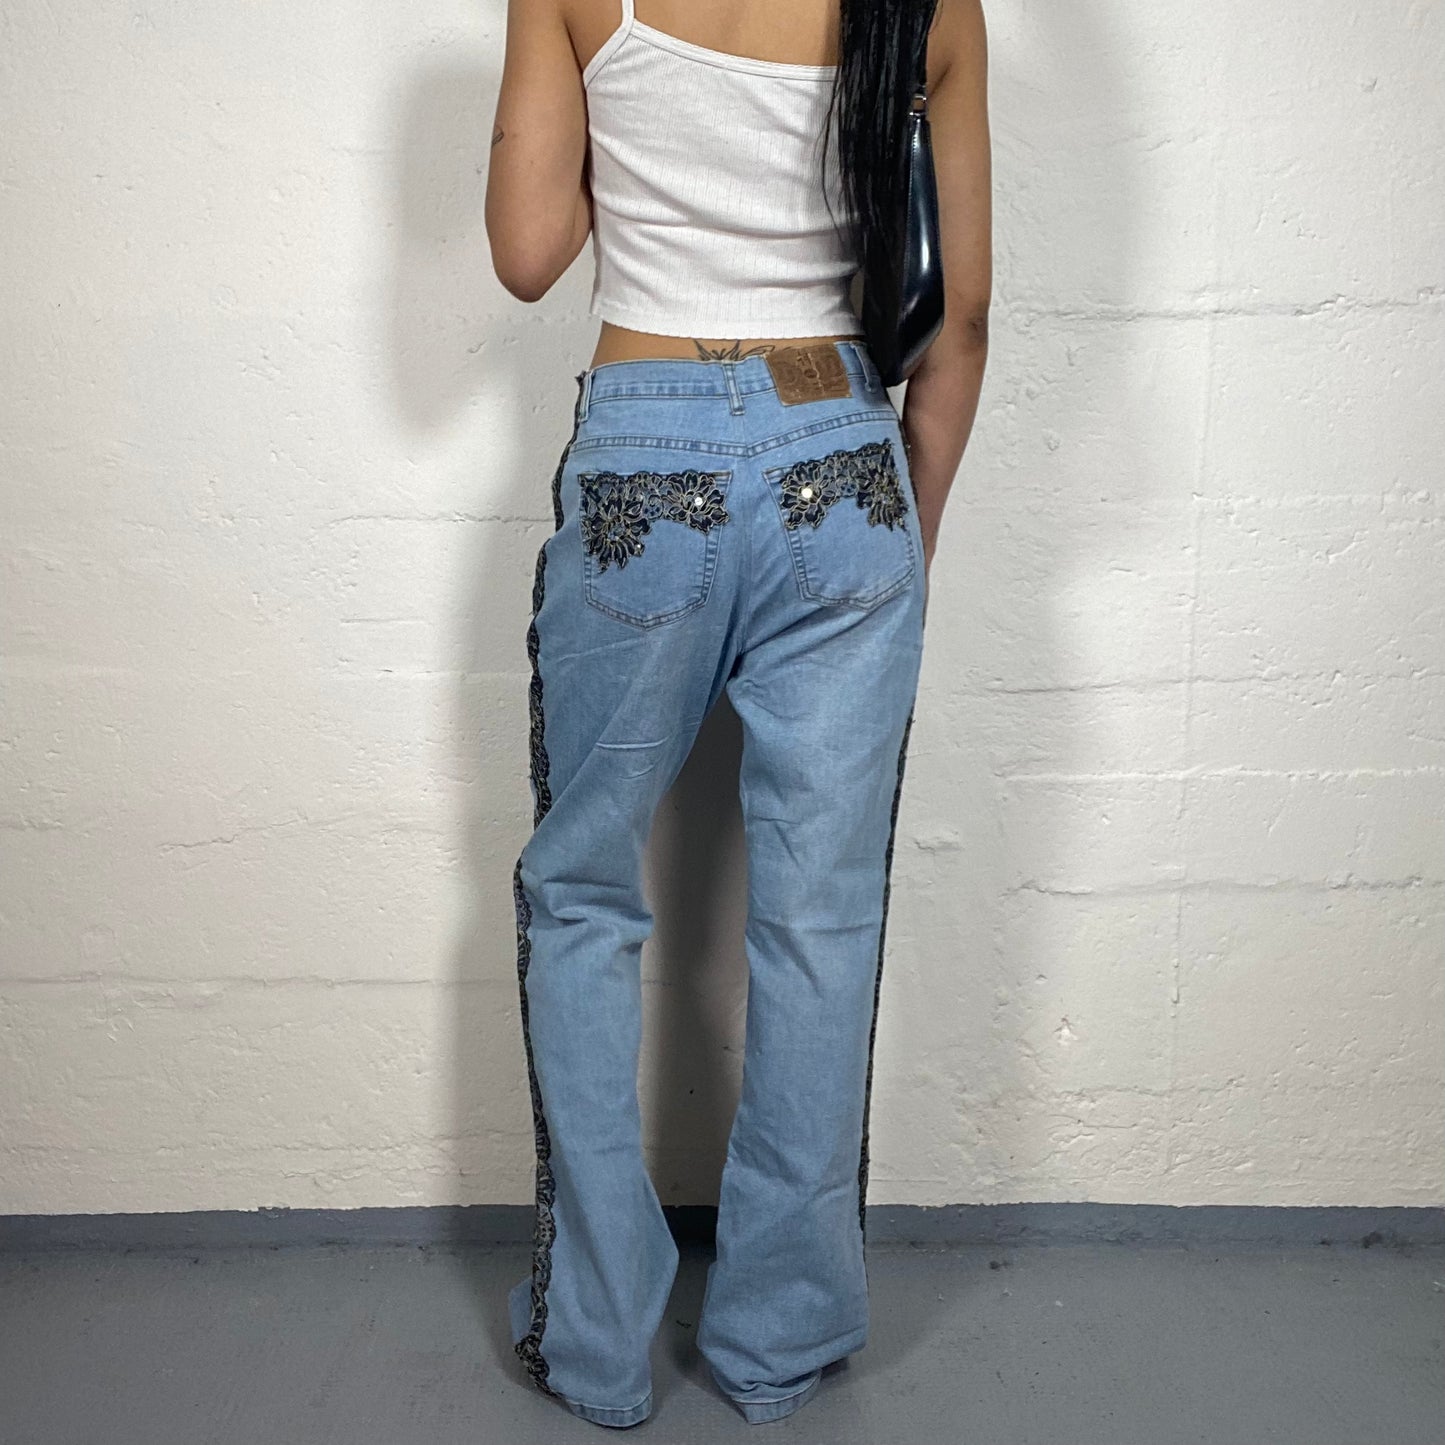 Vintage 2000's Casual Boho Light Blue Straight Cut Jeans with Floral Shiny Embroidery (M)